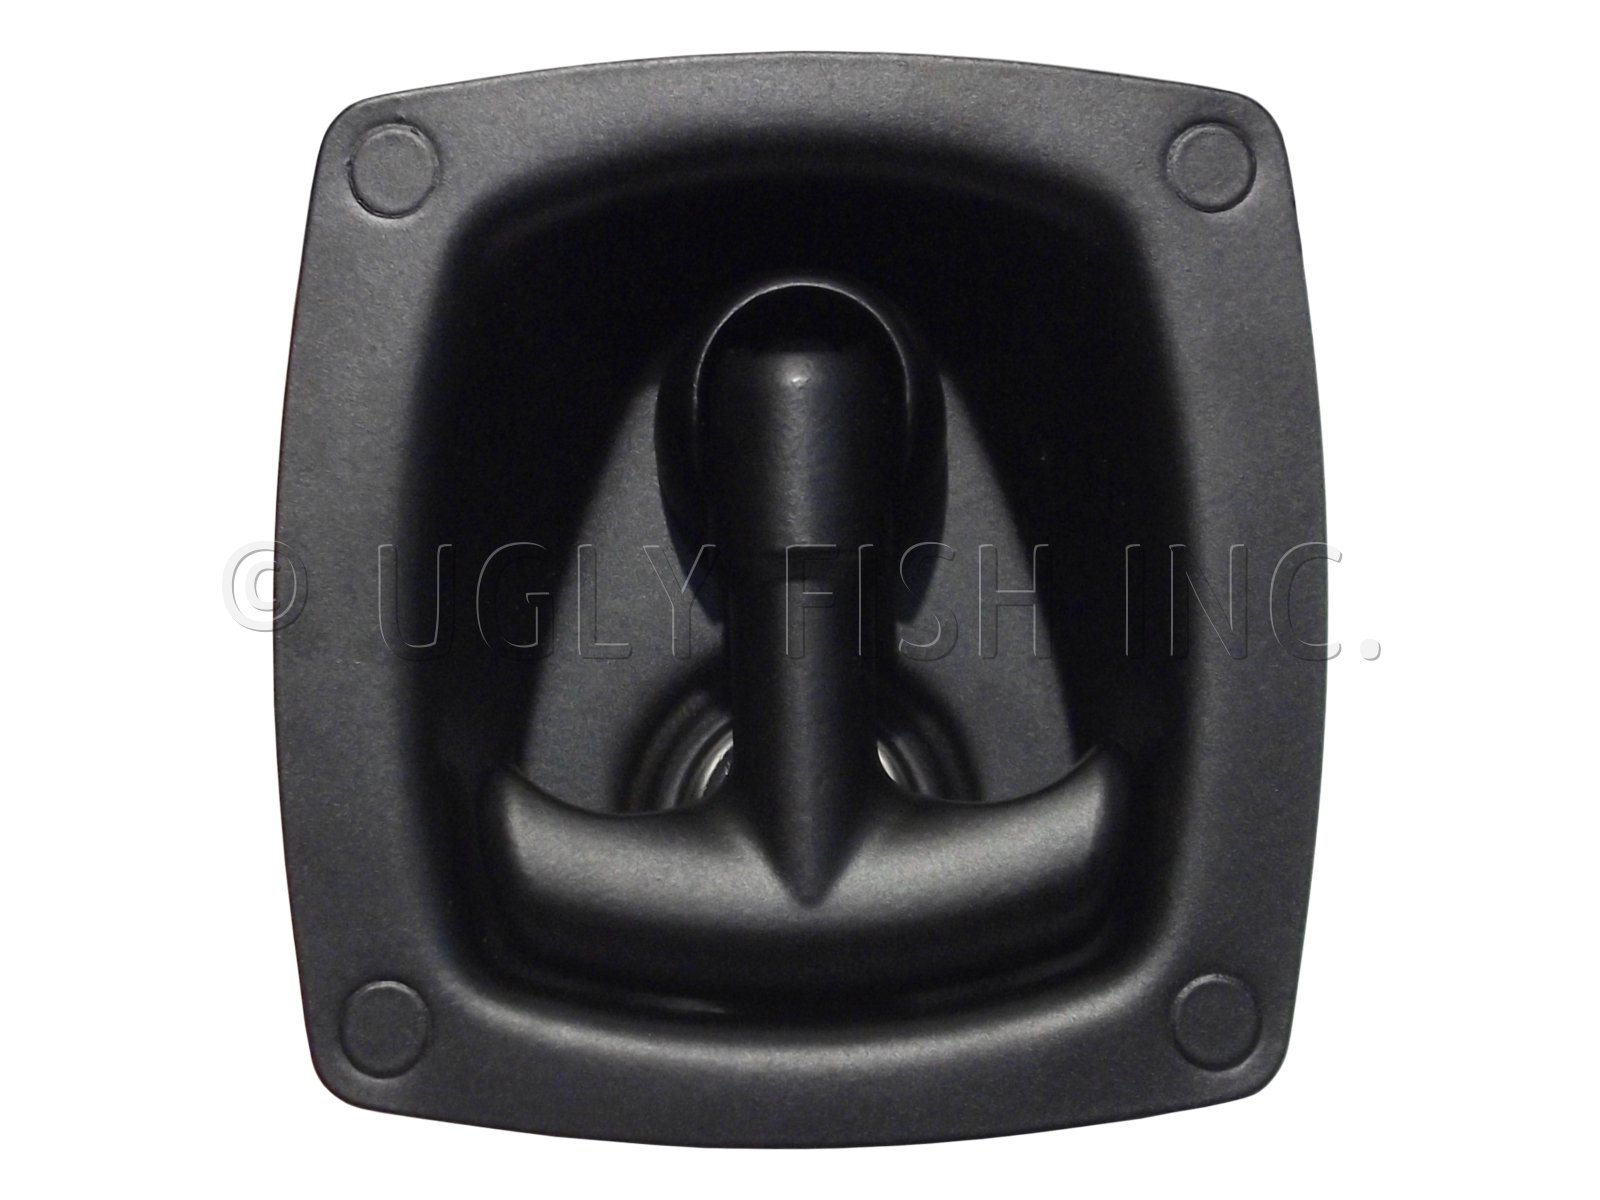 Flat swinghandle with compression function for locking set, Zinc die black  powder-coated and zinc-plated; 2225-U3-RE